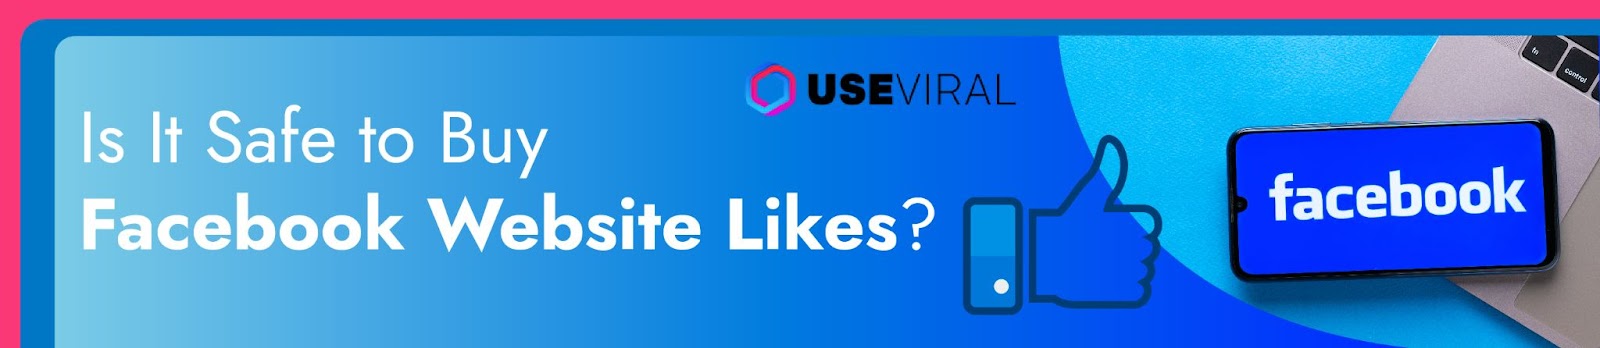 Is It Safe to Buy Facebook Website Likes?